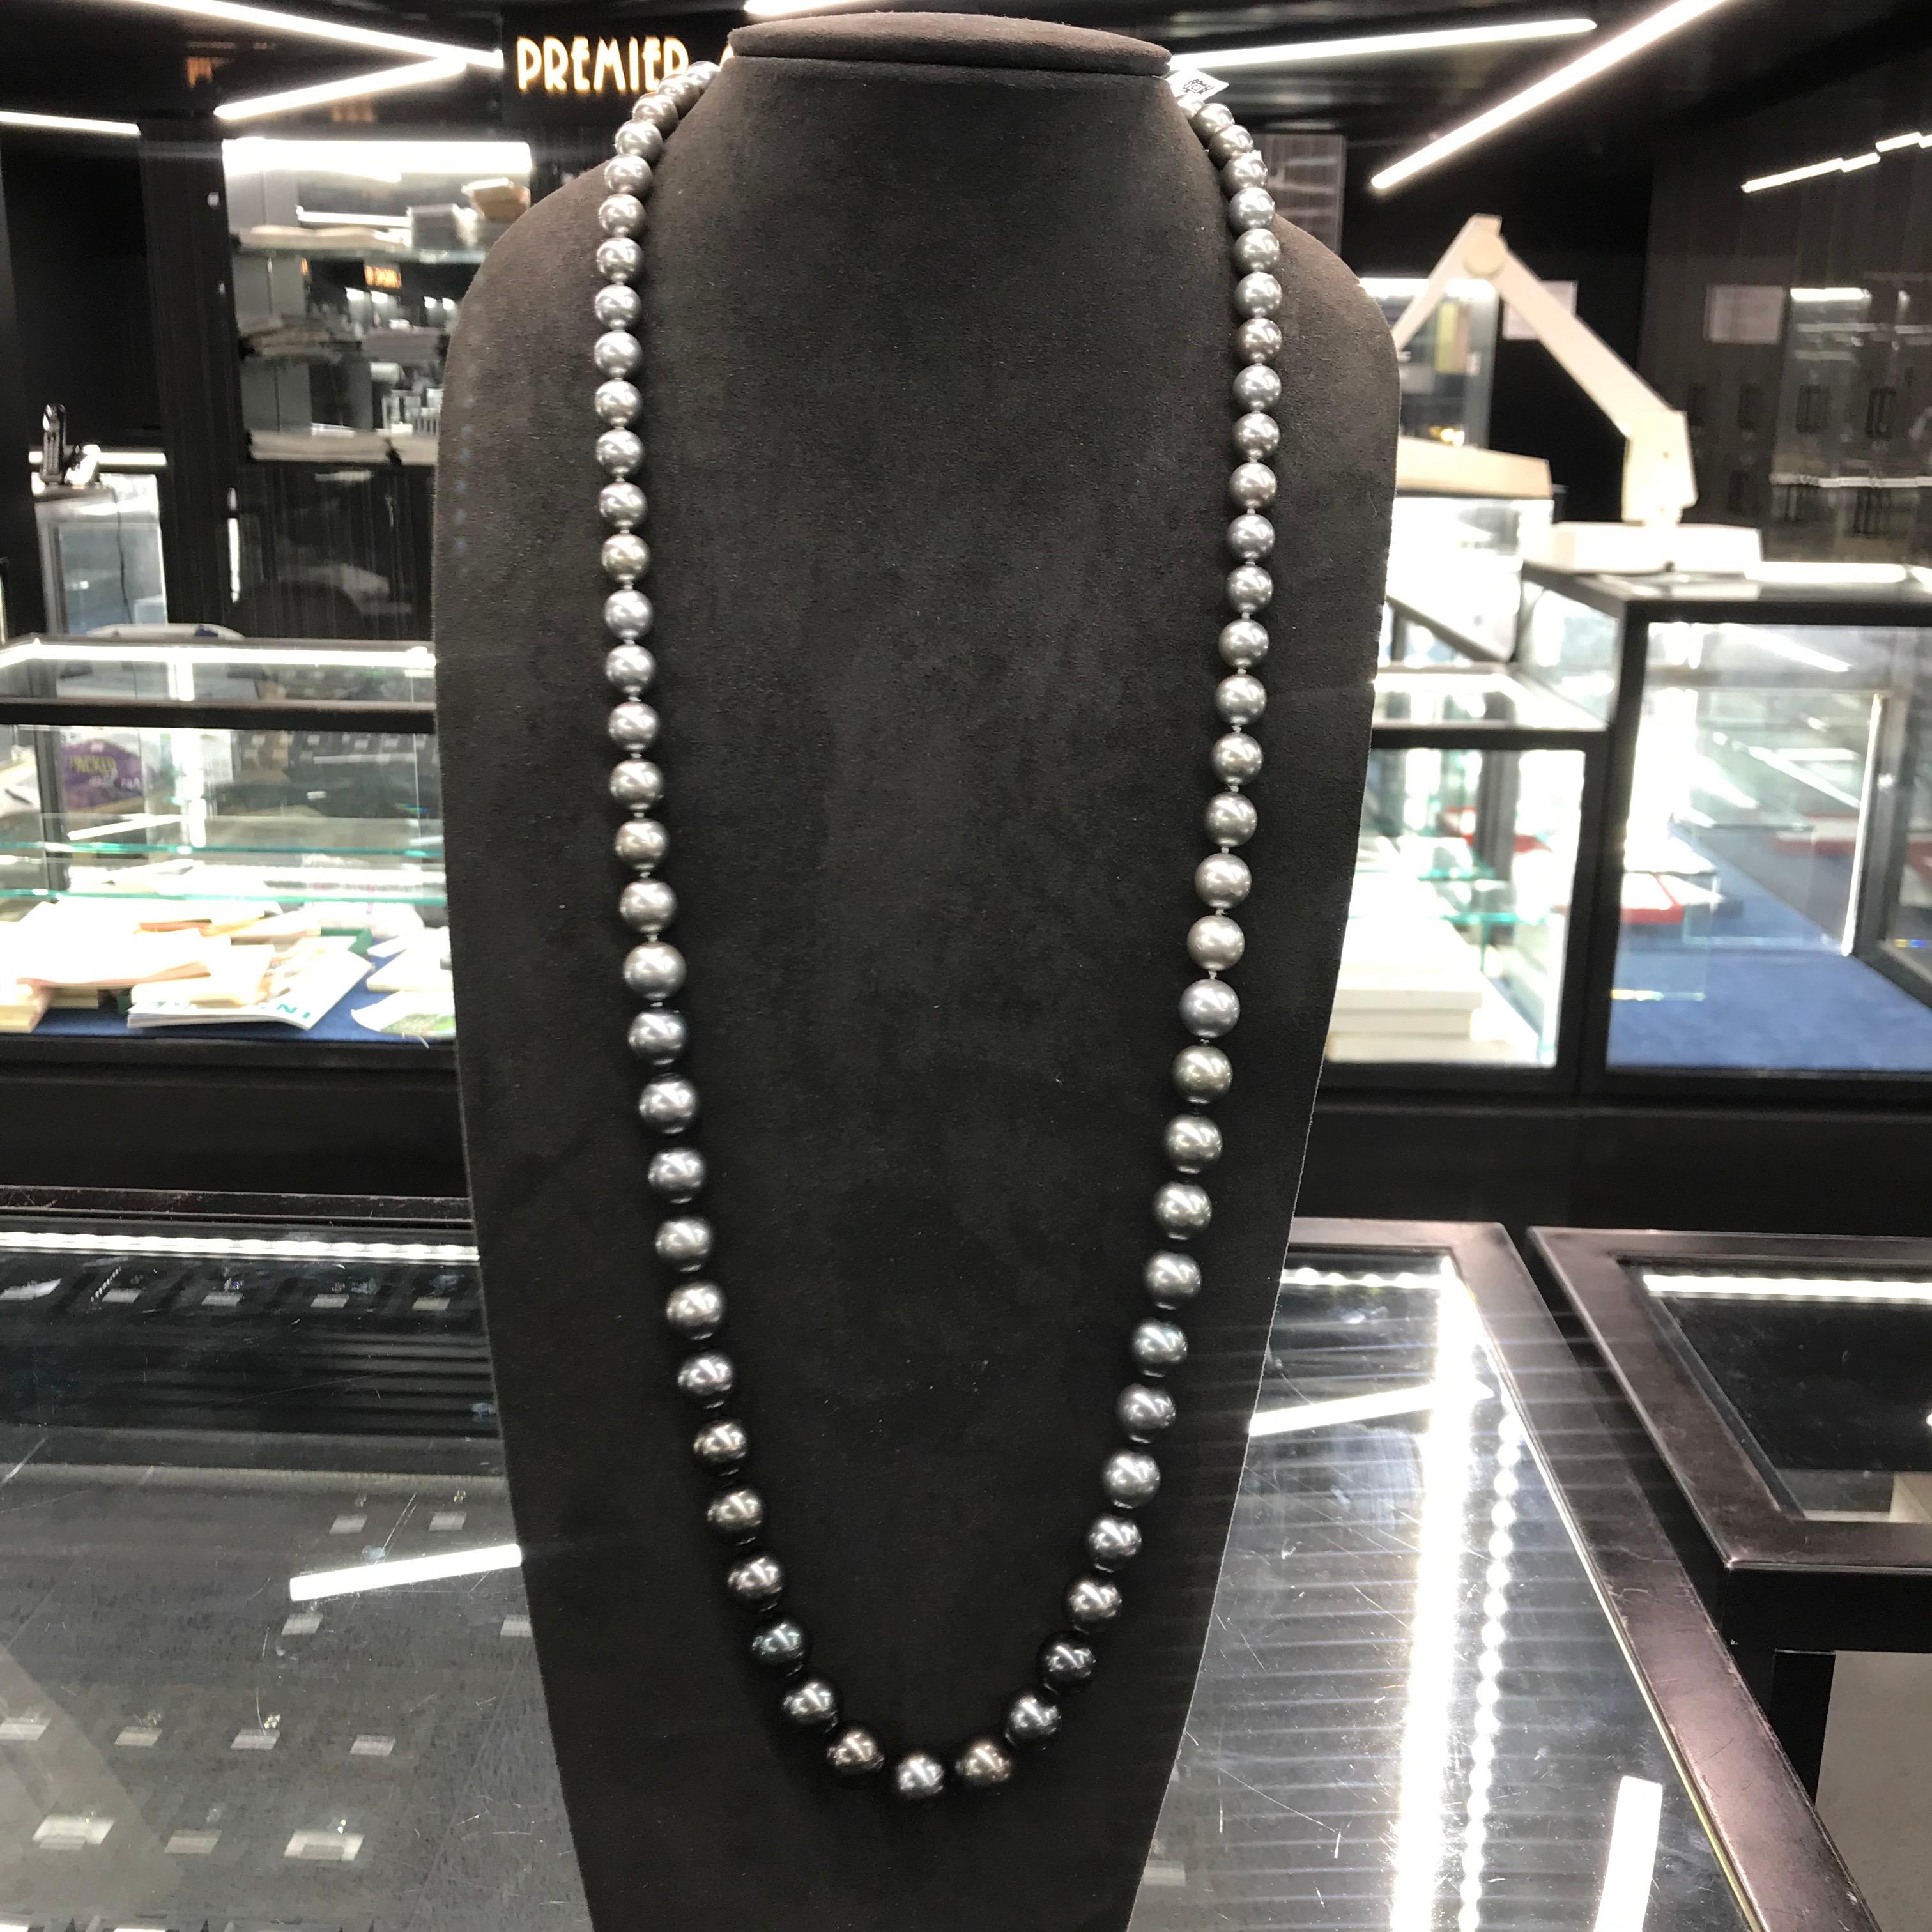 A lovely gorgeous opera ombre necklace featuring 75 Tahitian pearls measuring 9.2-13.5 mm in a white gold diamond ball clasp.

Pearl quality: AAA
Pearl Luster: AAA Excellent
Nacre : Very Thick

Strand can be made to order, shortened or longer. Clasp